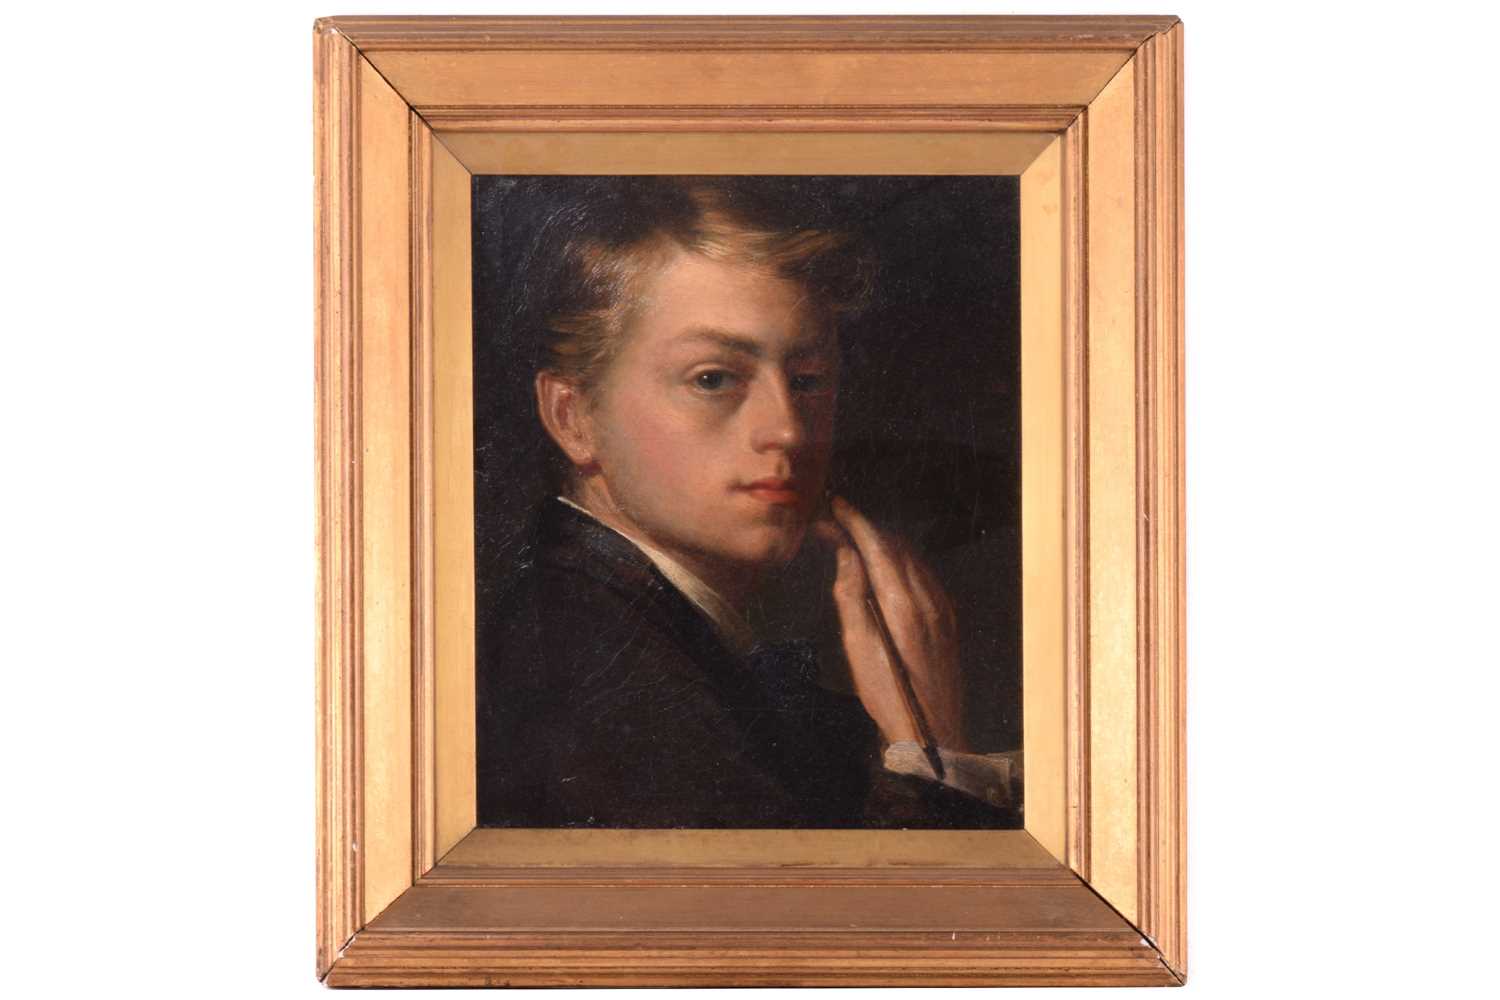 Frederick George Cotman (British, 1850-1920), Self Portrait of the Artist as a young man holding a